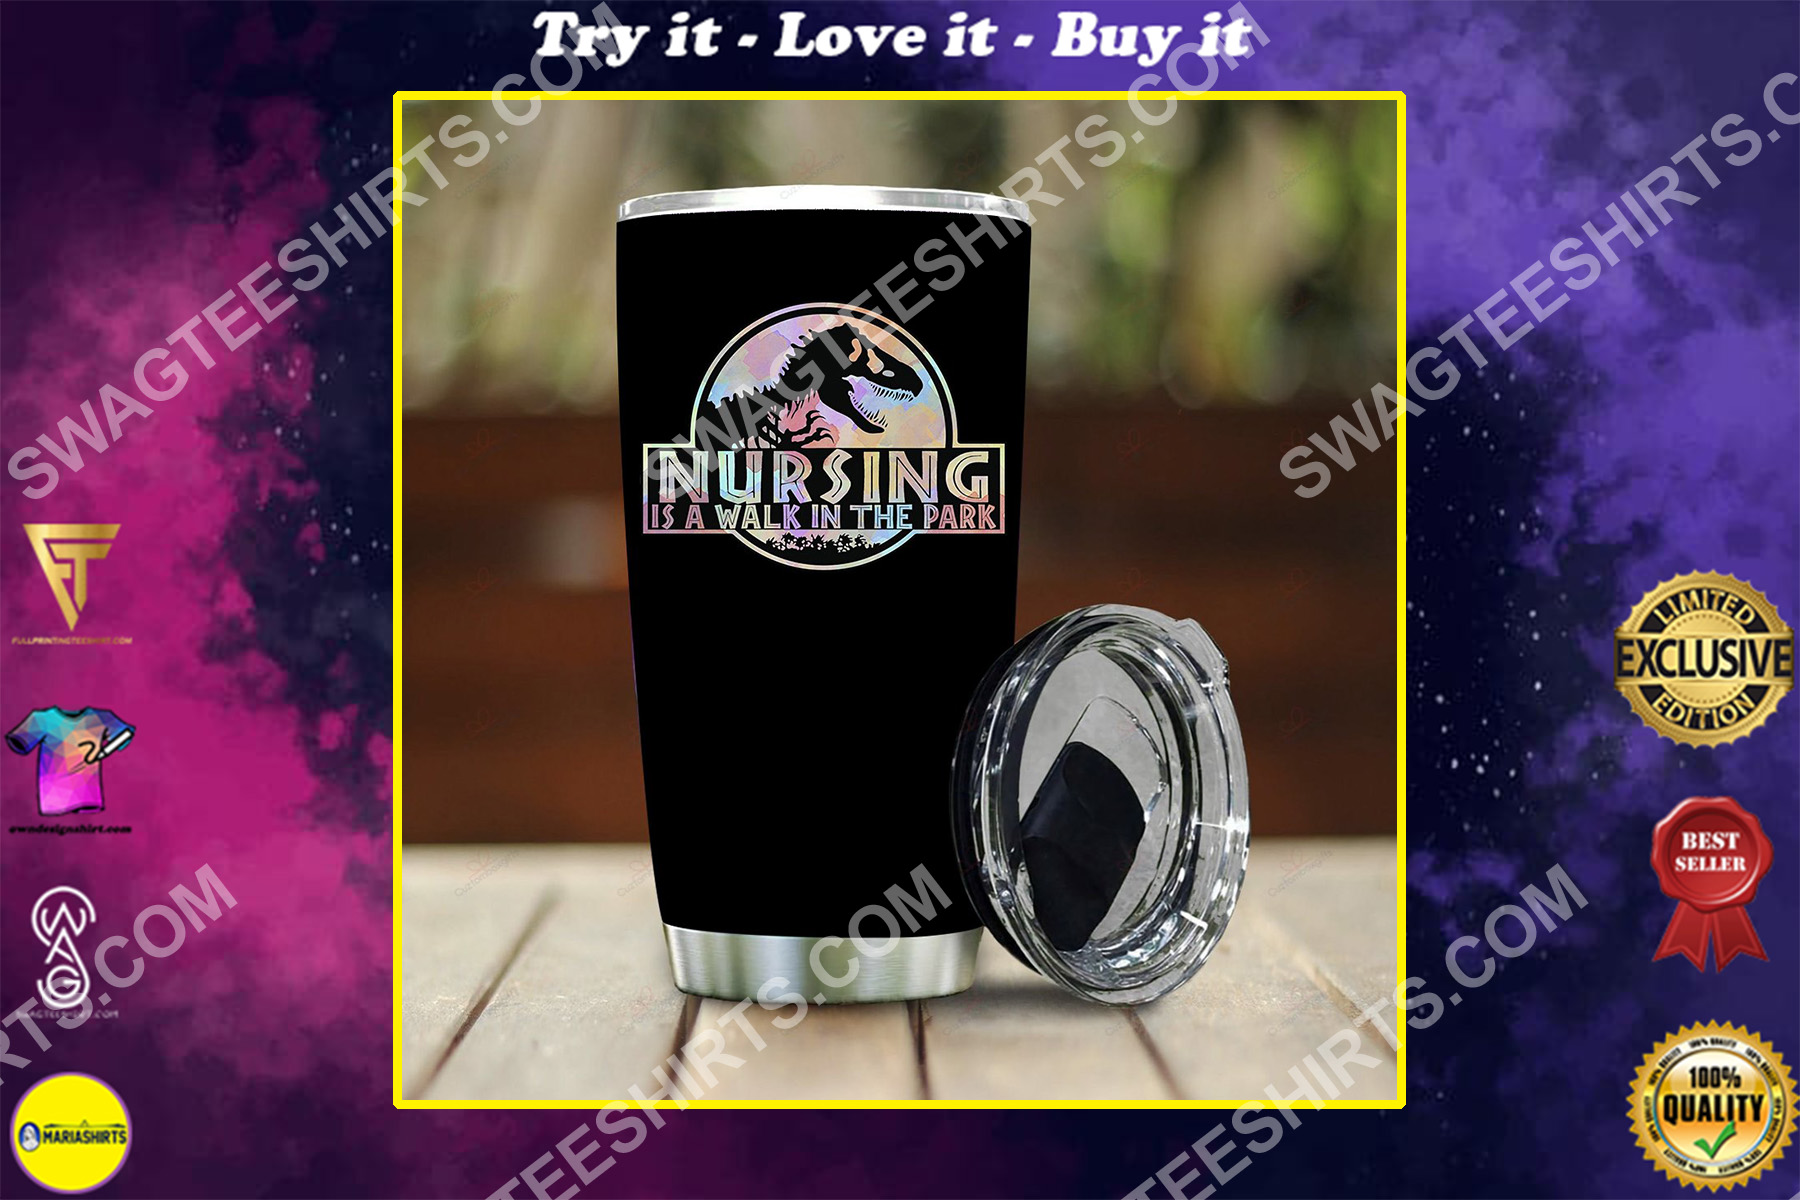 nursing is a walk in the park all over printed stainless steel tumbler